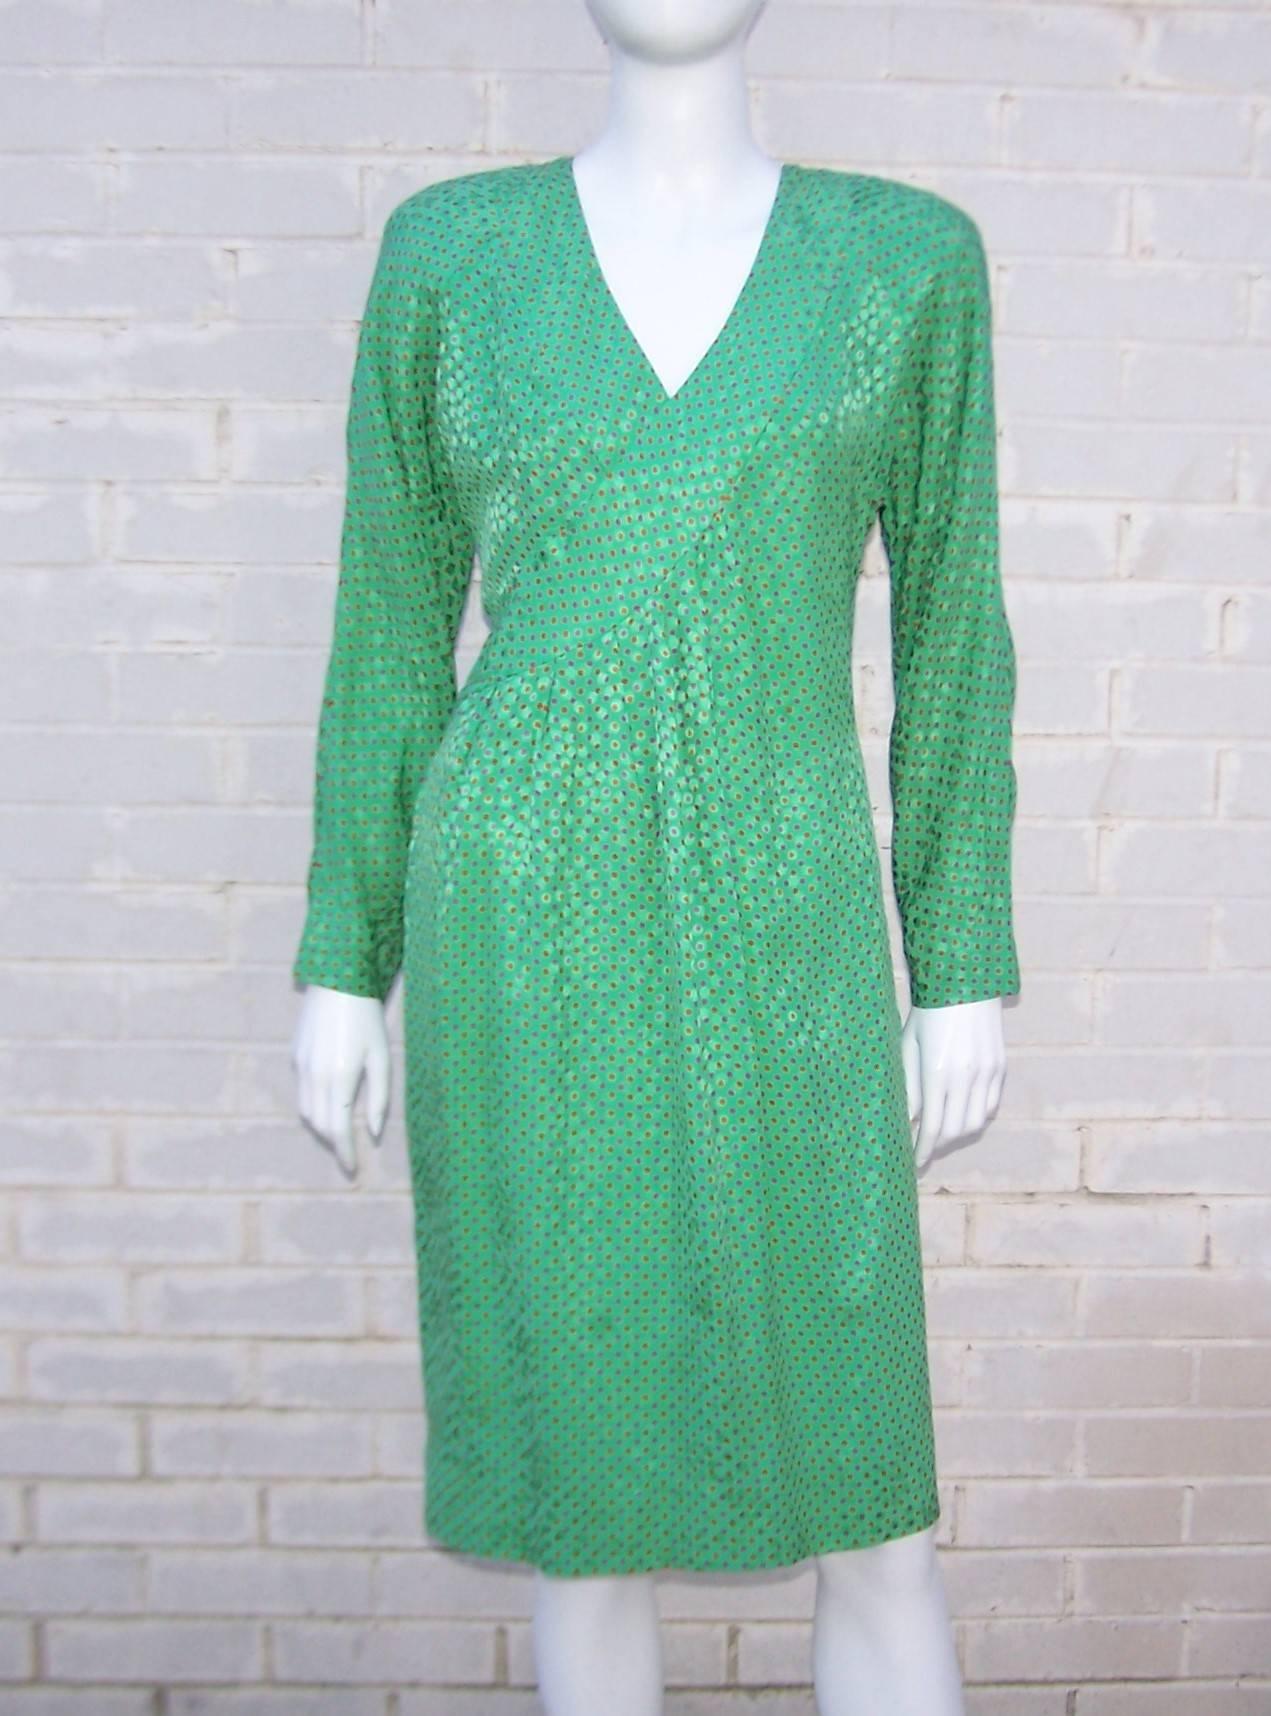 This 1980's dress by Japanese designer, Hanae Mori, is a vibrant combination of a shimmering green jacquard pattern embellished with fuchsia and orange polka dots.  Ms. Mori's special 'east-meets-west' blend of Japanese style details and Western